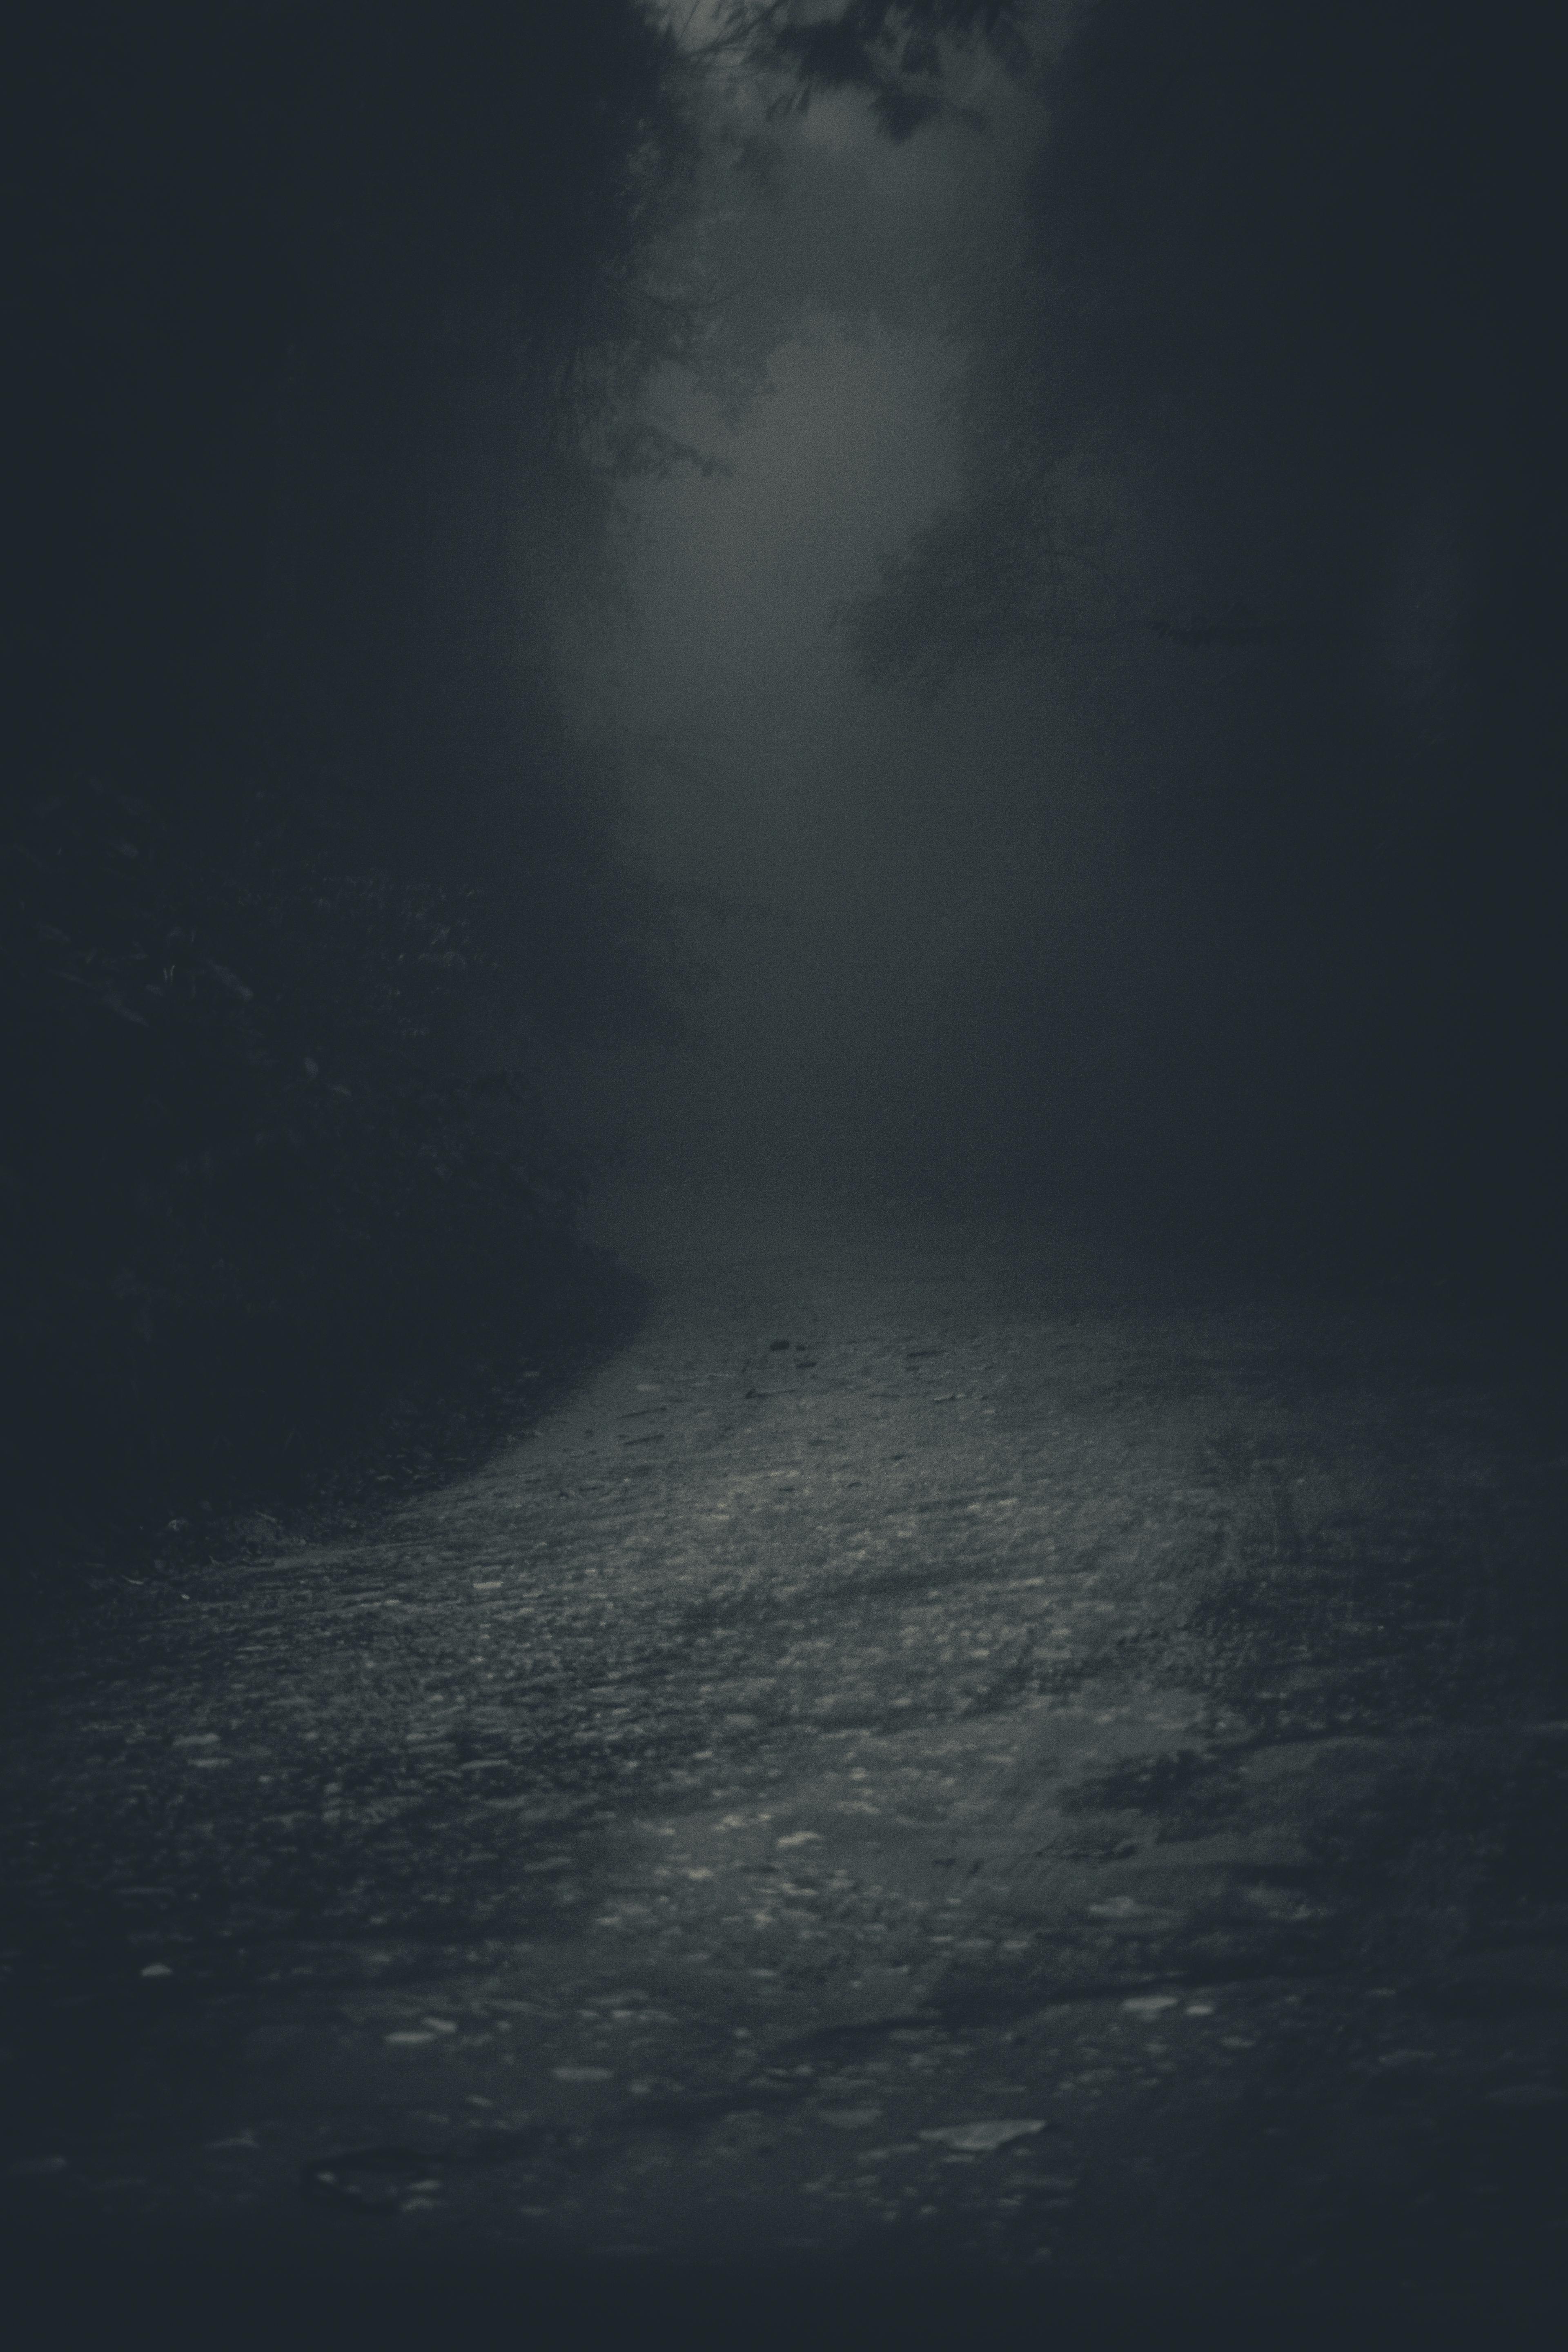 Horror Background Photos Download Free Horror Background Stock Photos  HD  Images